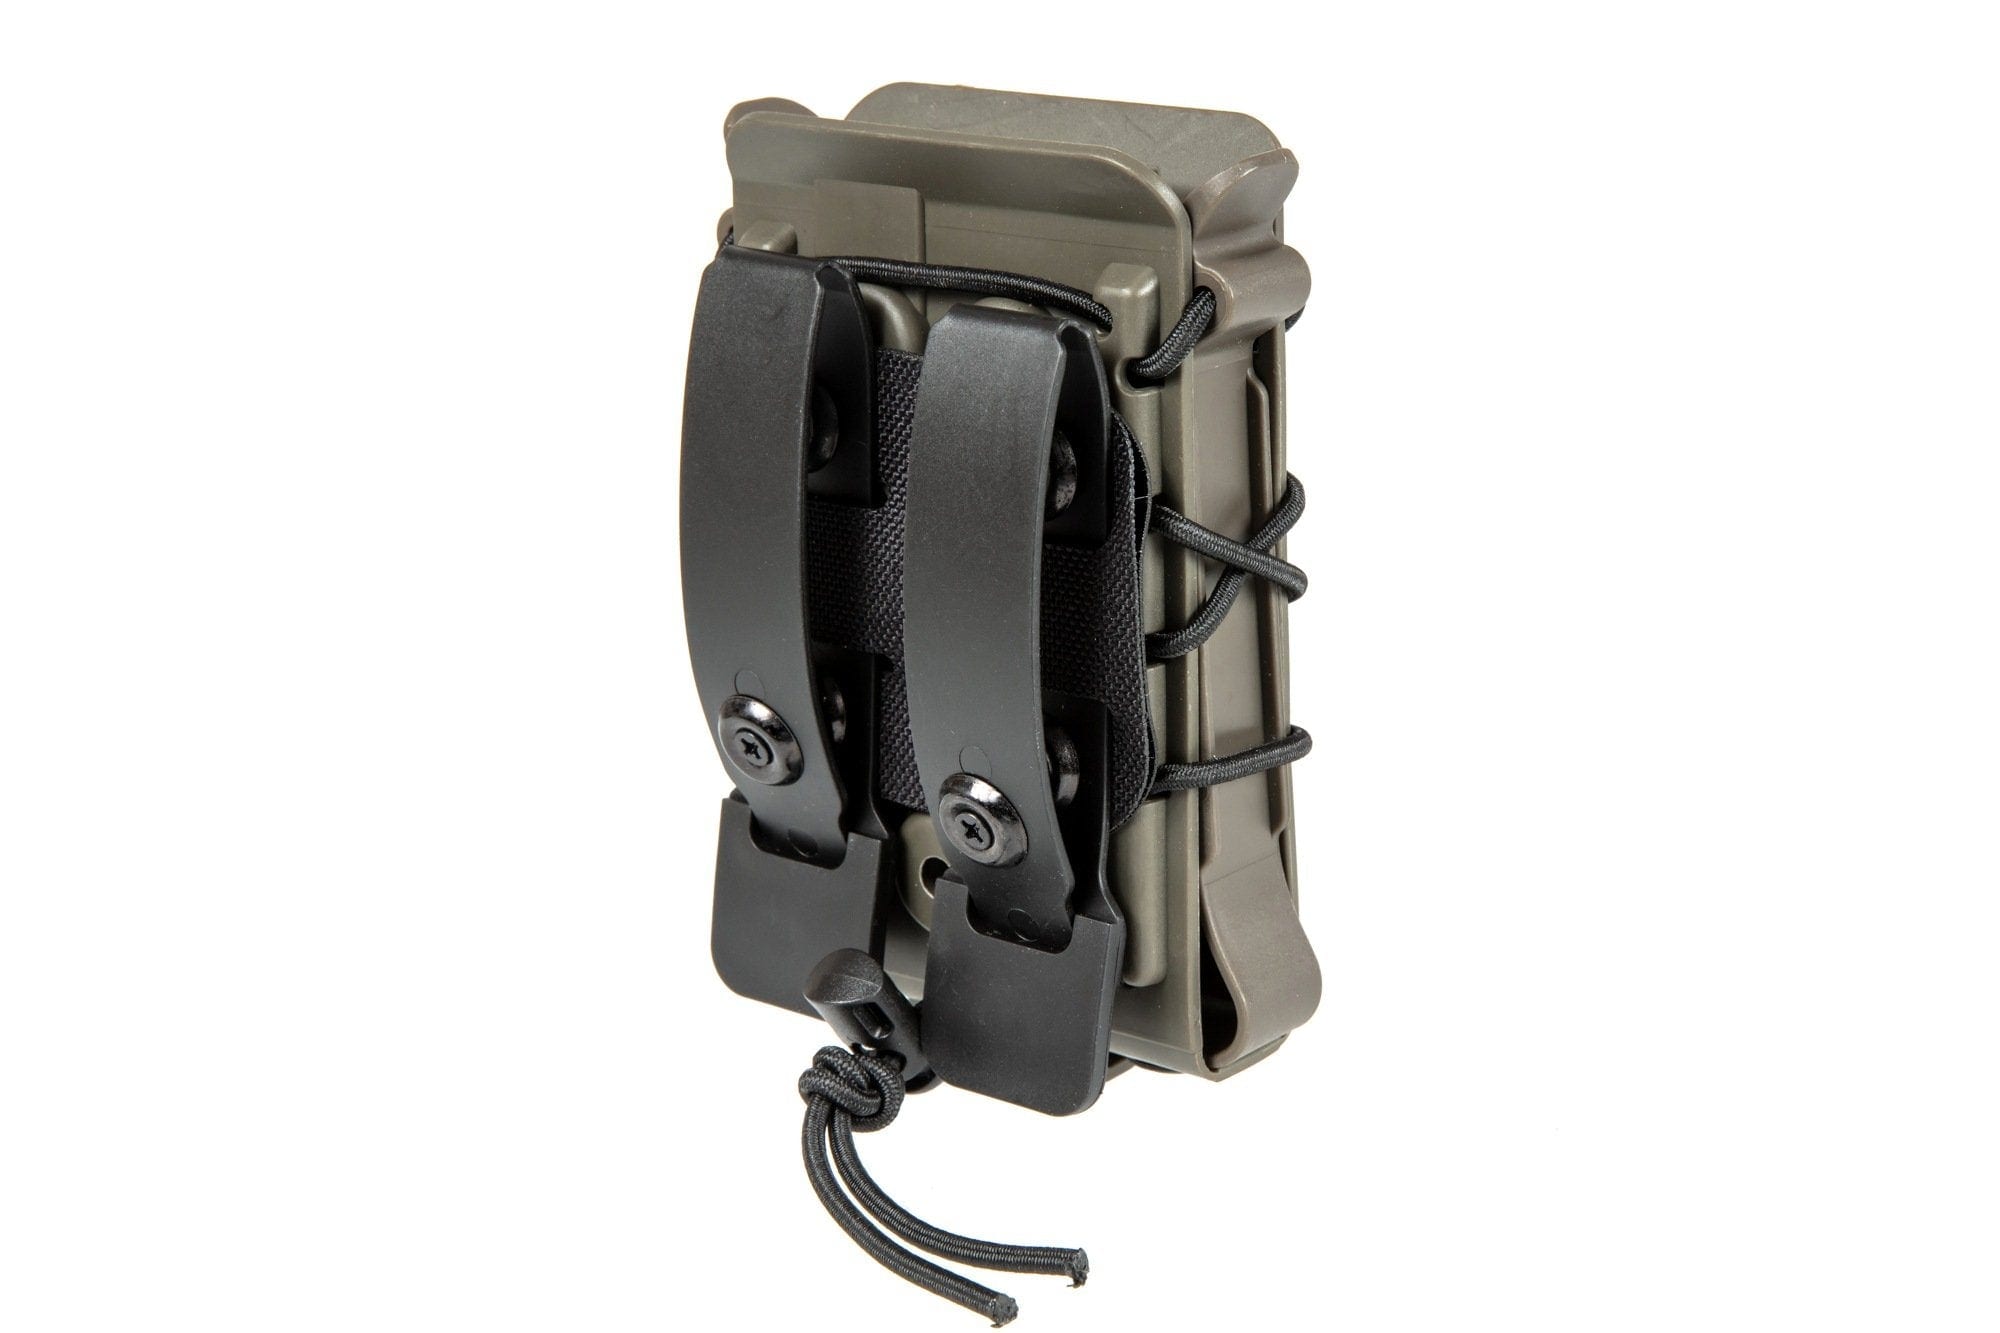 HSG 7.62 Magazine Pouch - Olive Drab by FMA on Airsoft Mania Europe